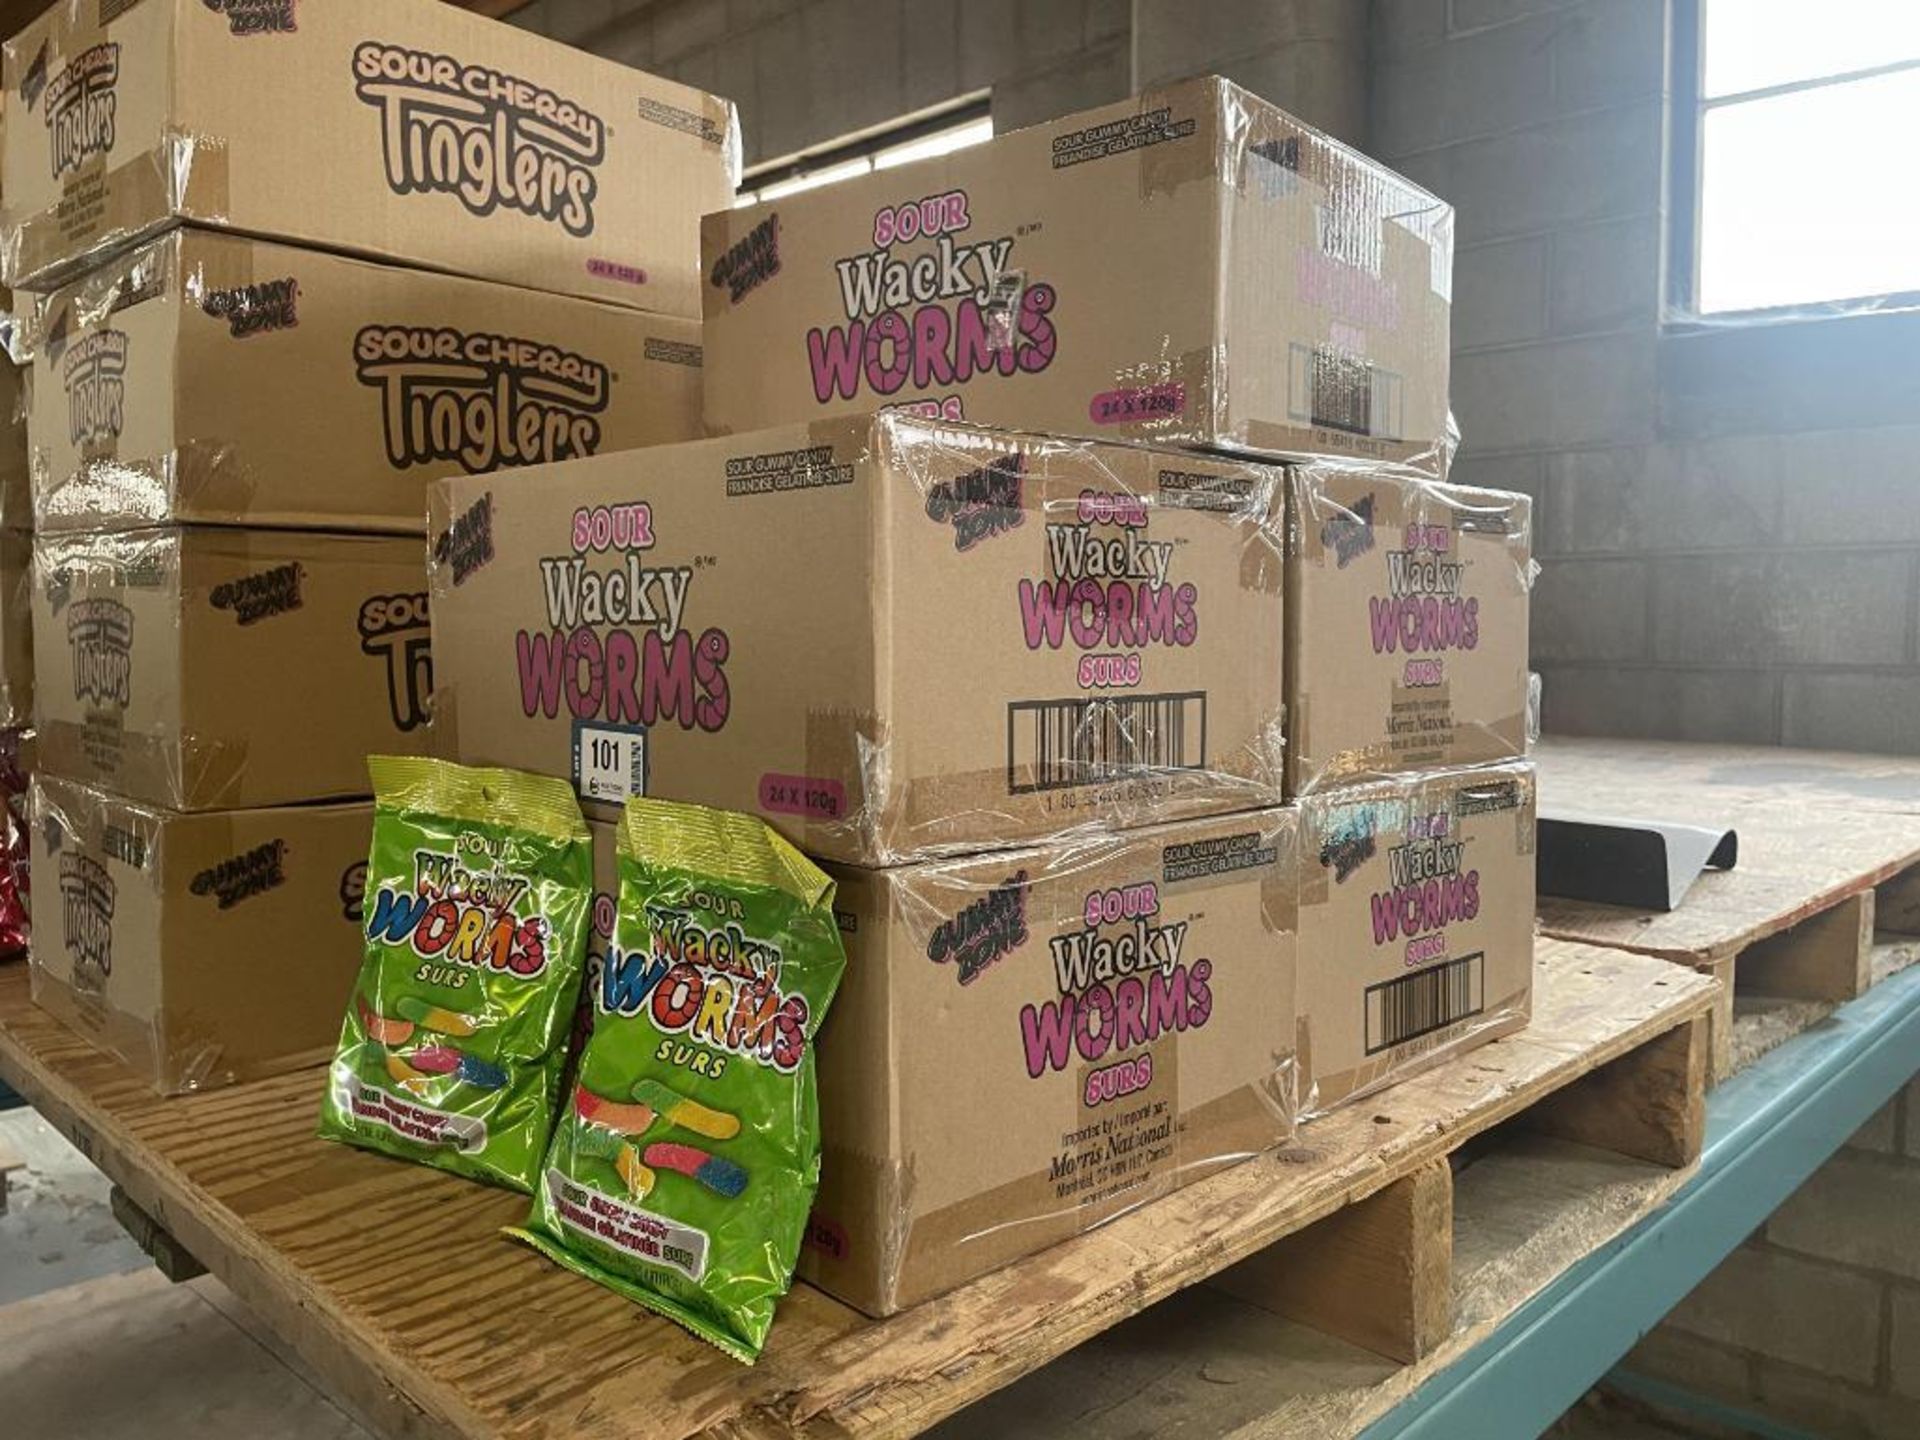 (5) BOXES OF SOUR WACKY WORMS, 12/120G PER BOX - Image 3 of 3